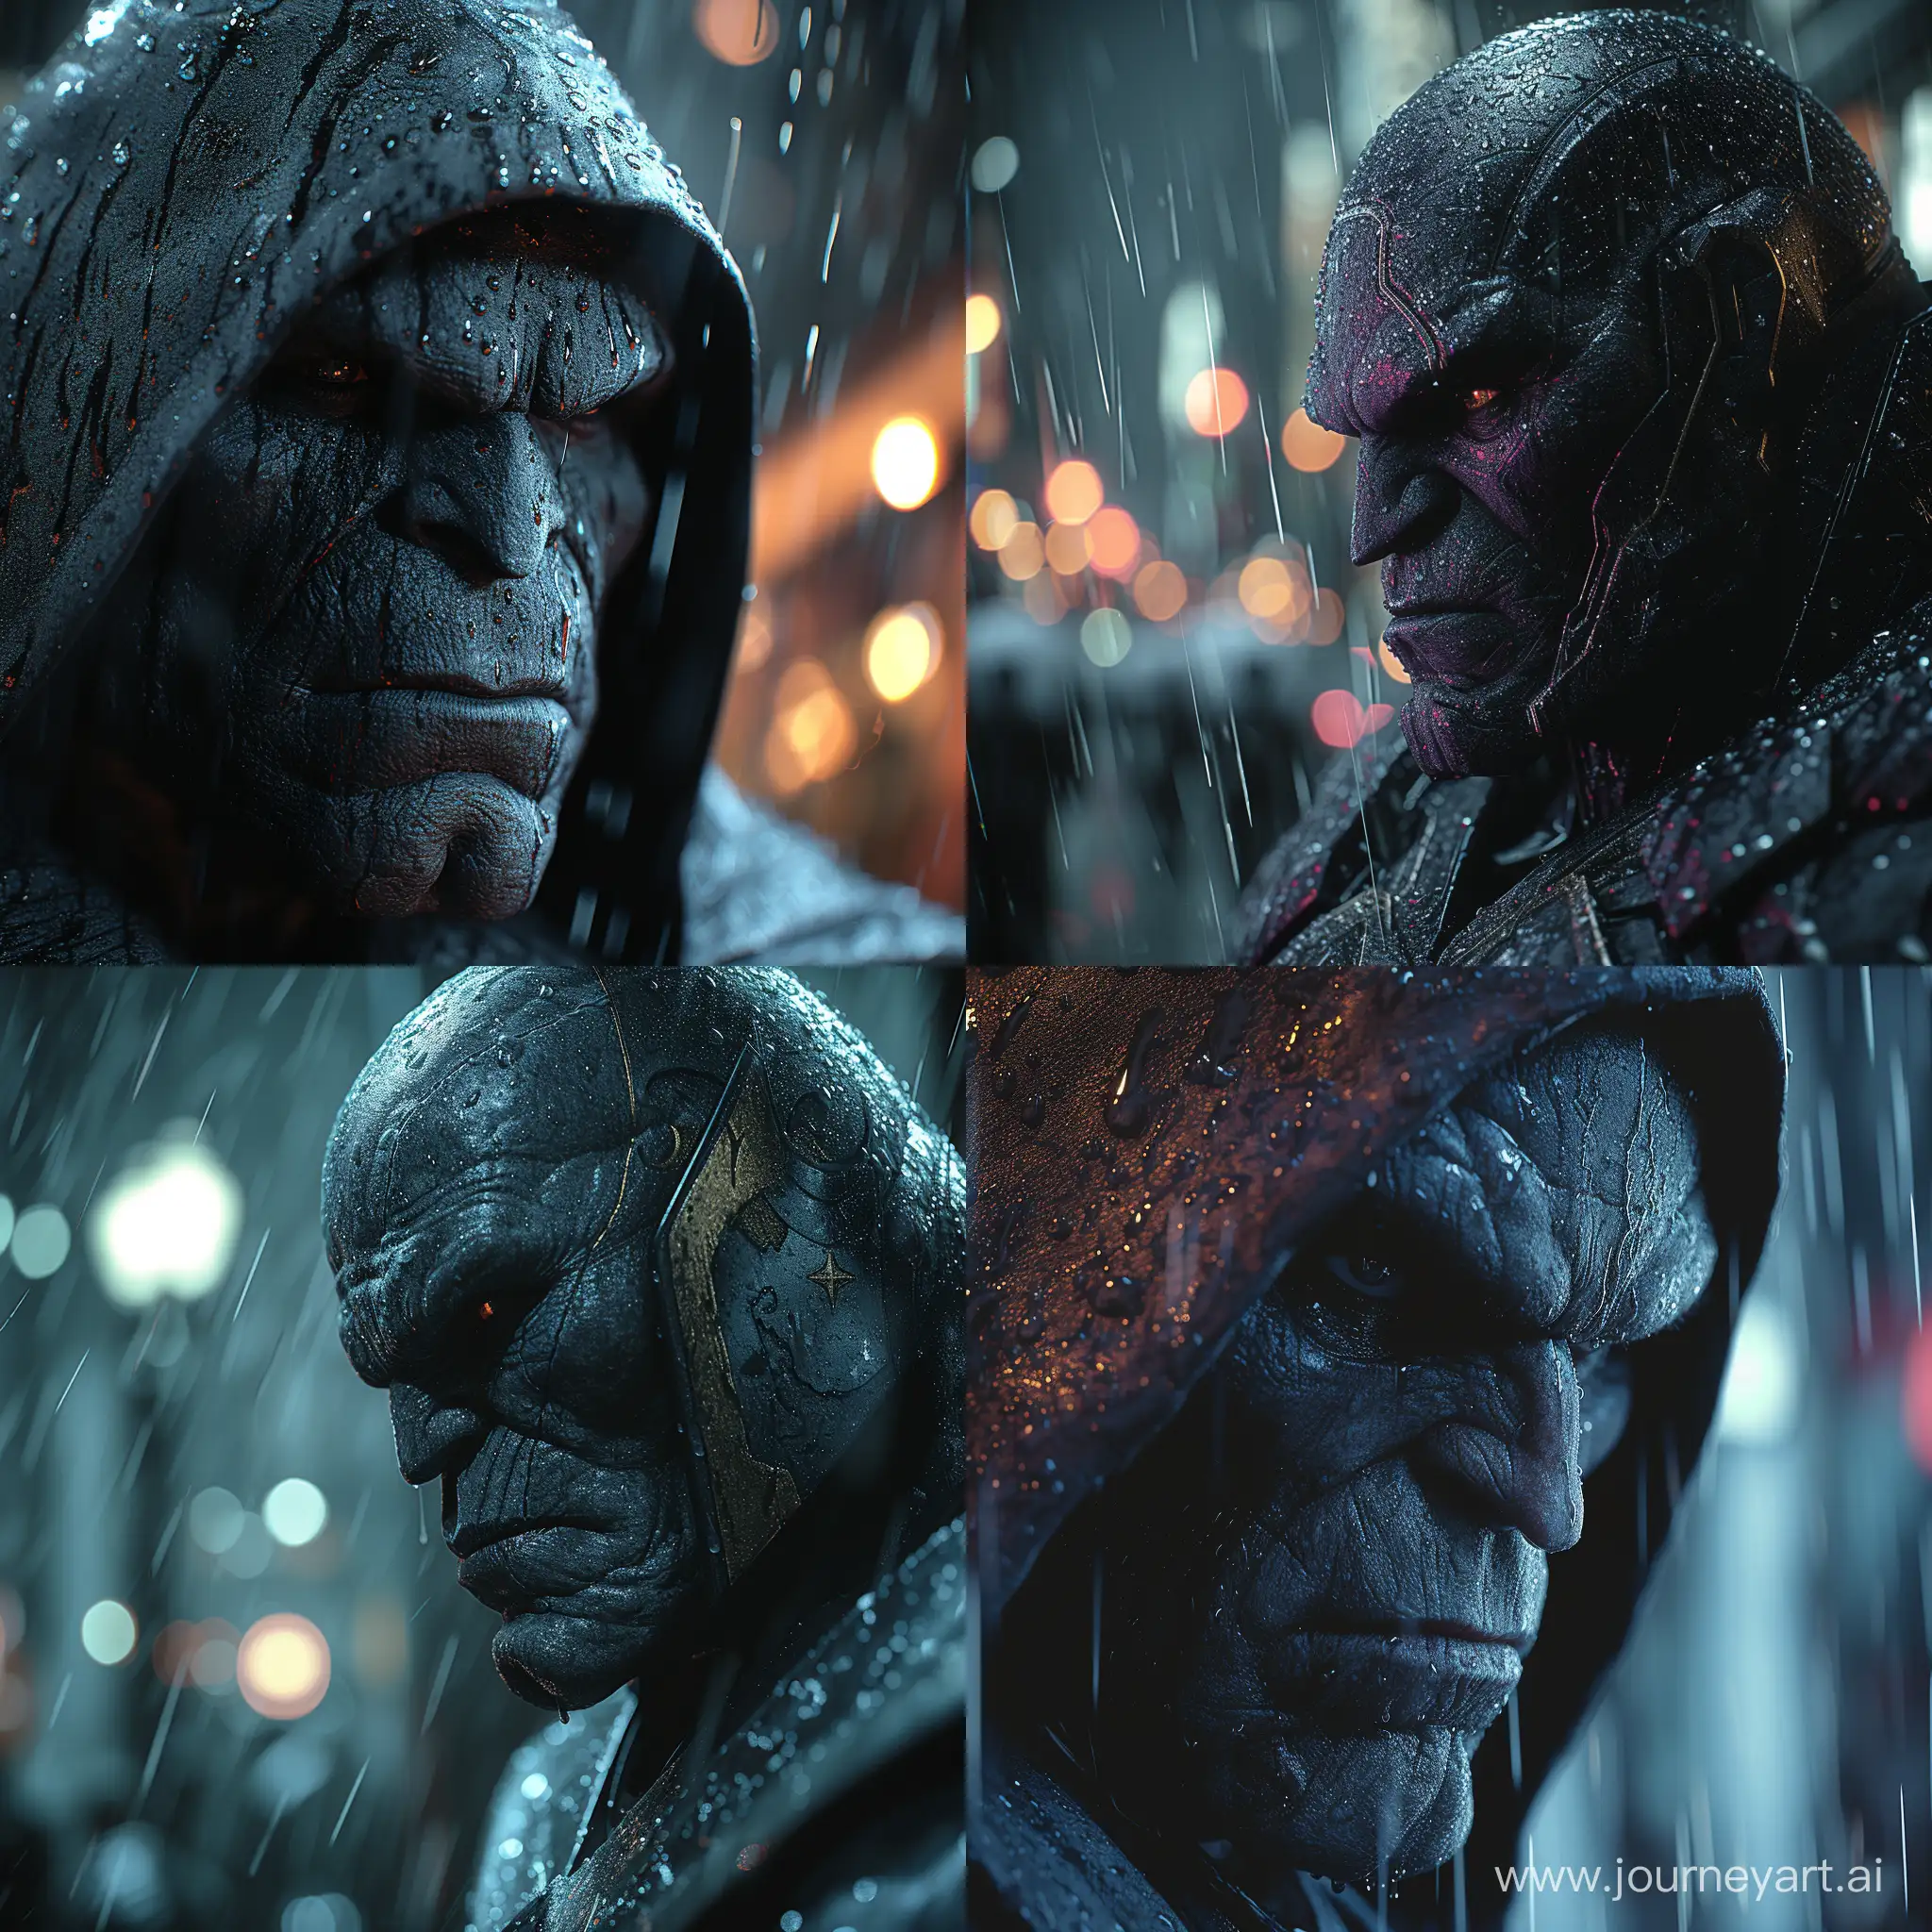 Create a realistic and dynamic image of Darkseid in Gotham City, with a close-up depth of field, set in the rain. The image should capture the essence of Gotham City's atmosphere and Darkseid's character, incorporating a stylized approach. Pay attention to detail and realism, and ensure that the image conveys a sense of drama and intrigue --stylize 750 --v 6